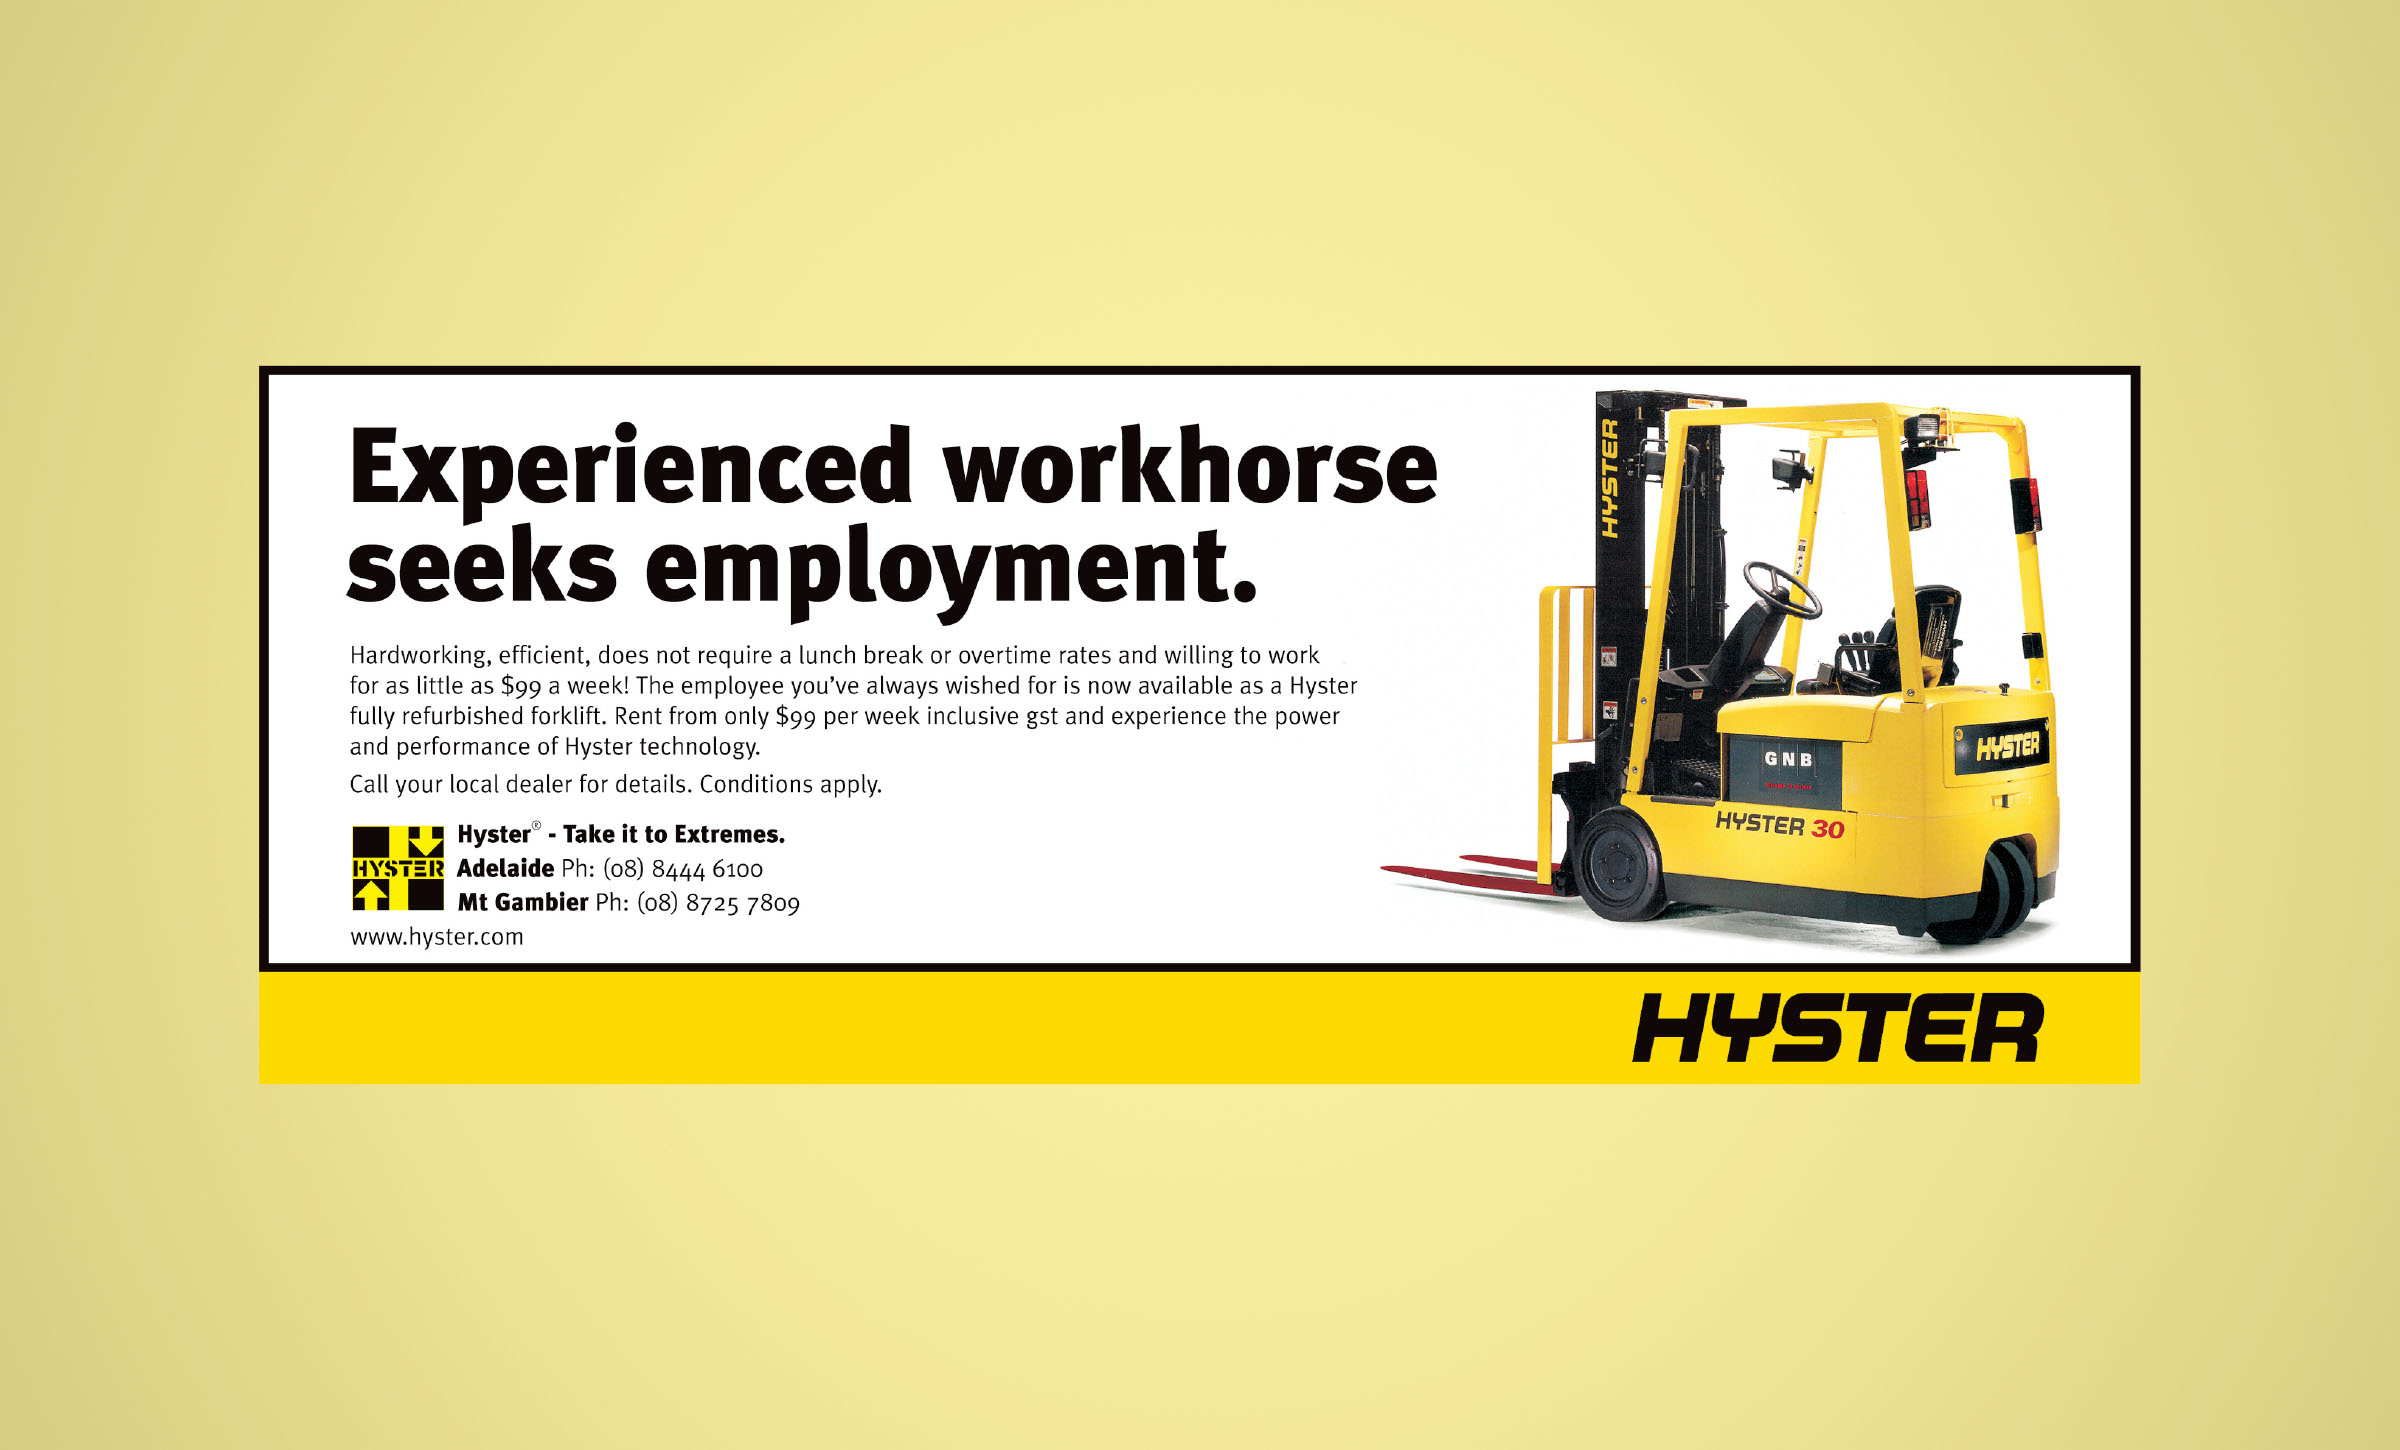 NRG Digital - Hyster Corporate Branding and Advertising Campaign